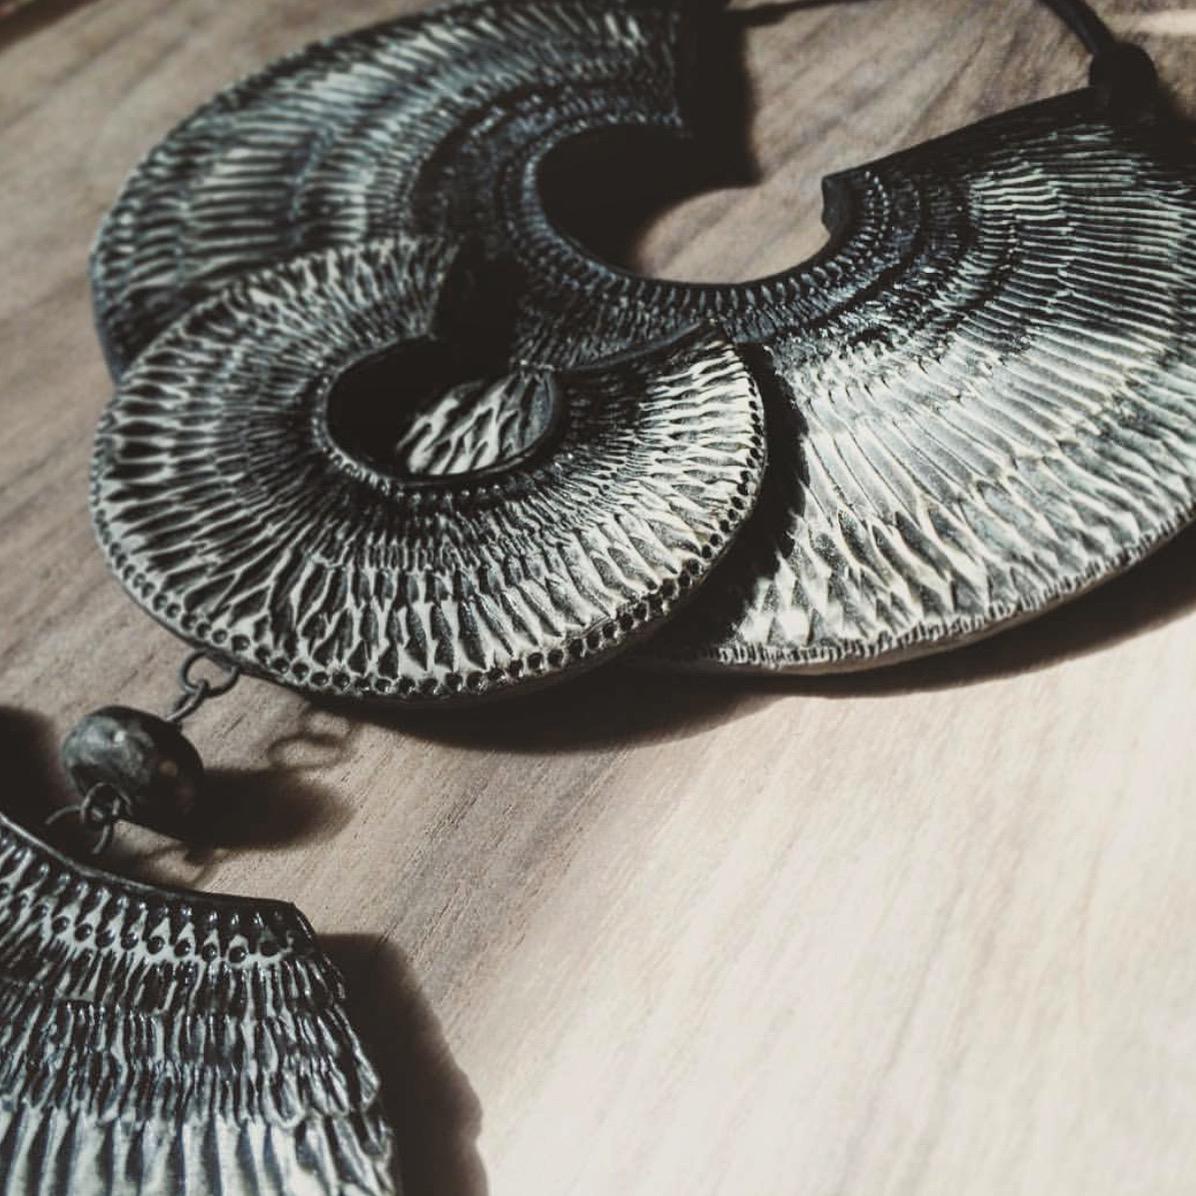 This hand marked wall hanging is carefully constructed from carved porcelain with a black glaze and leather strap. The piece is a meditative journey, with intricate patterns mimicking those found in nature. 

A unique wall piece that strays from the